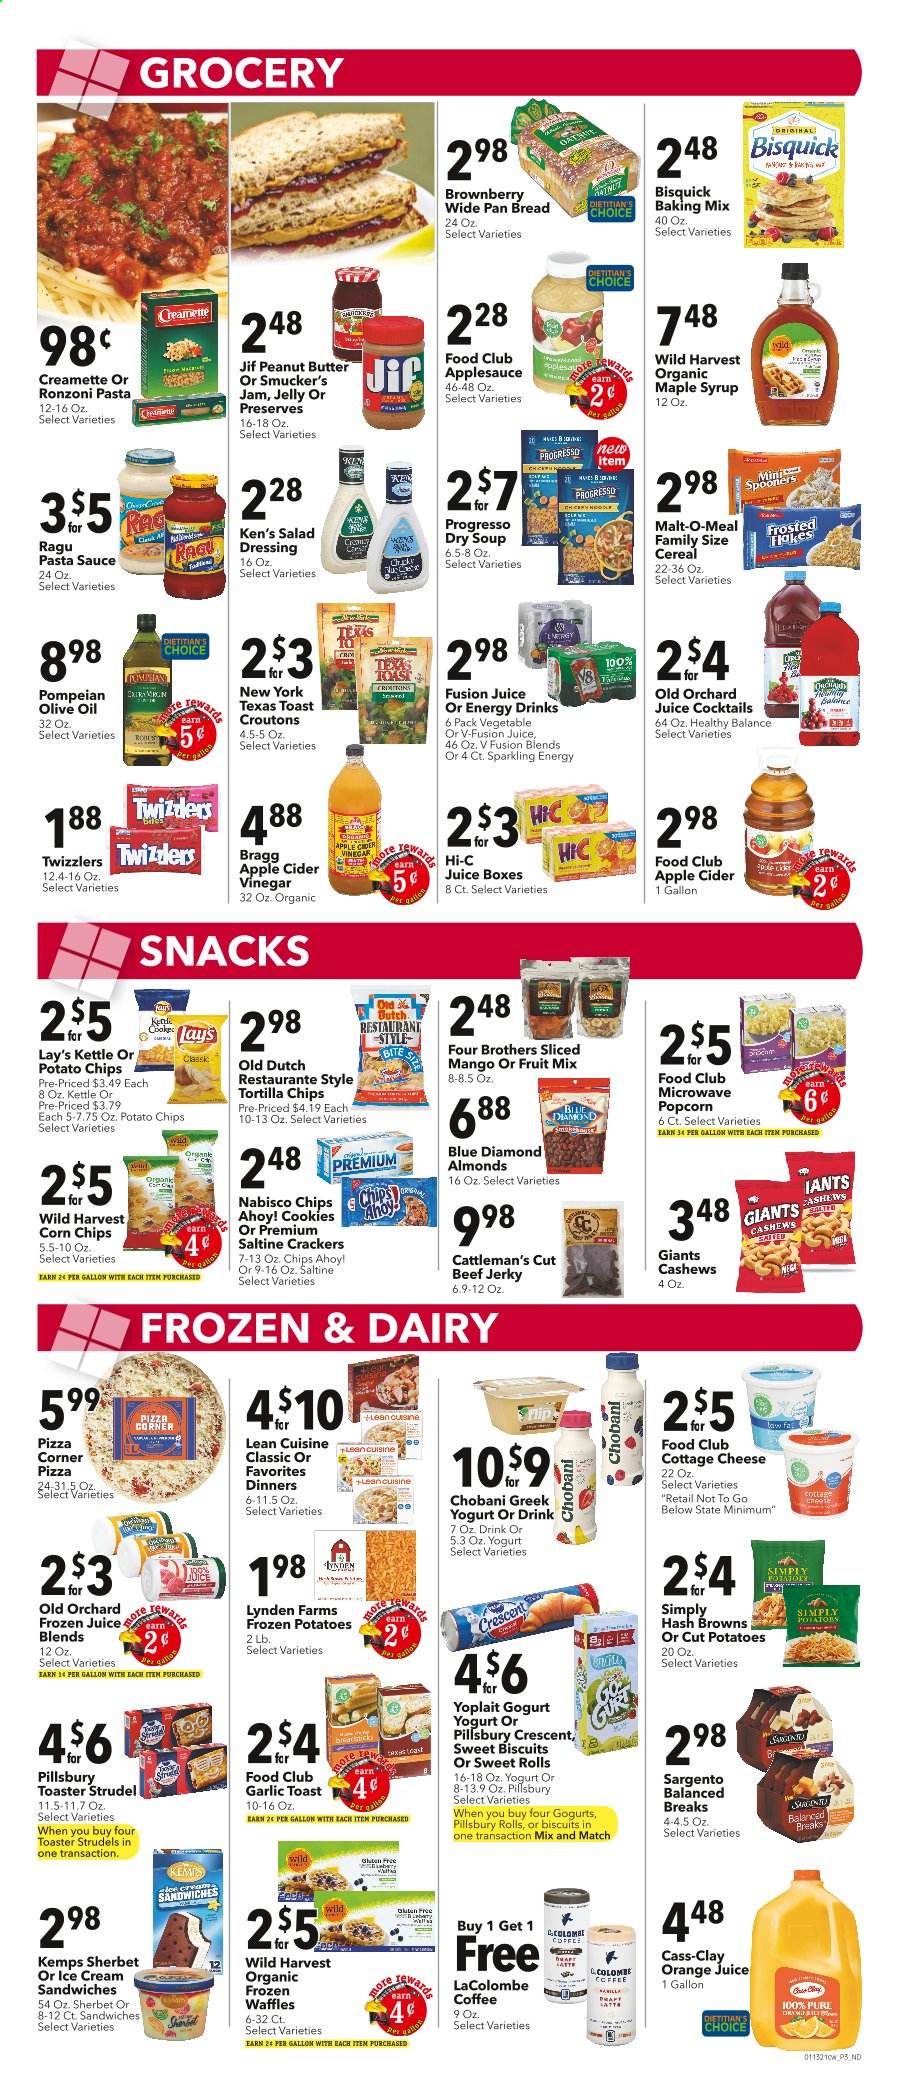 thumbnail - Cash Wise Flyer - 01/13/2021 - 01/19/2021 - Sales products - bread, toast bread, strudel, waffles, hash browns, pizza, soup, sauce, Pillsbury, Progresso, Lean Cuisine, Four Brothers, beef jerky, jerky, cottage cheese, cheese, Kemps, Sargento, greek yoghurt, yoghurt, jelly, Yoplait, Chobani, ice cream, sherbet, ice cream sandwich, mango, cookies, fruit mix, crackers, biscuit, Chips Ahoy!, Wild Harvest, croutons, tortilla chips, potato chips, snack, Lay’s, corn chips, popcorn, Bisquick, malt, garlic, cereals, Frosted Flakes, Creamette, salad dressing, pasta sauce, dressing, ragu, apple cider vinegar, olive oil, apple sauce, maple syrup, fruit jam, peanut butter, syrup, Jif, almonds, cashews, Blue Diamond, orange juice, juice, energy drink, Hi-c, coffee. Page 3.